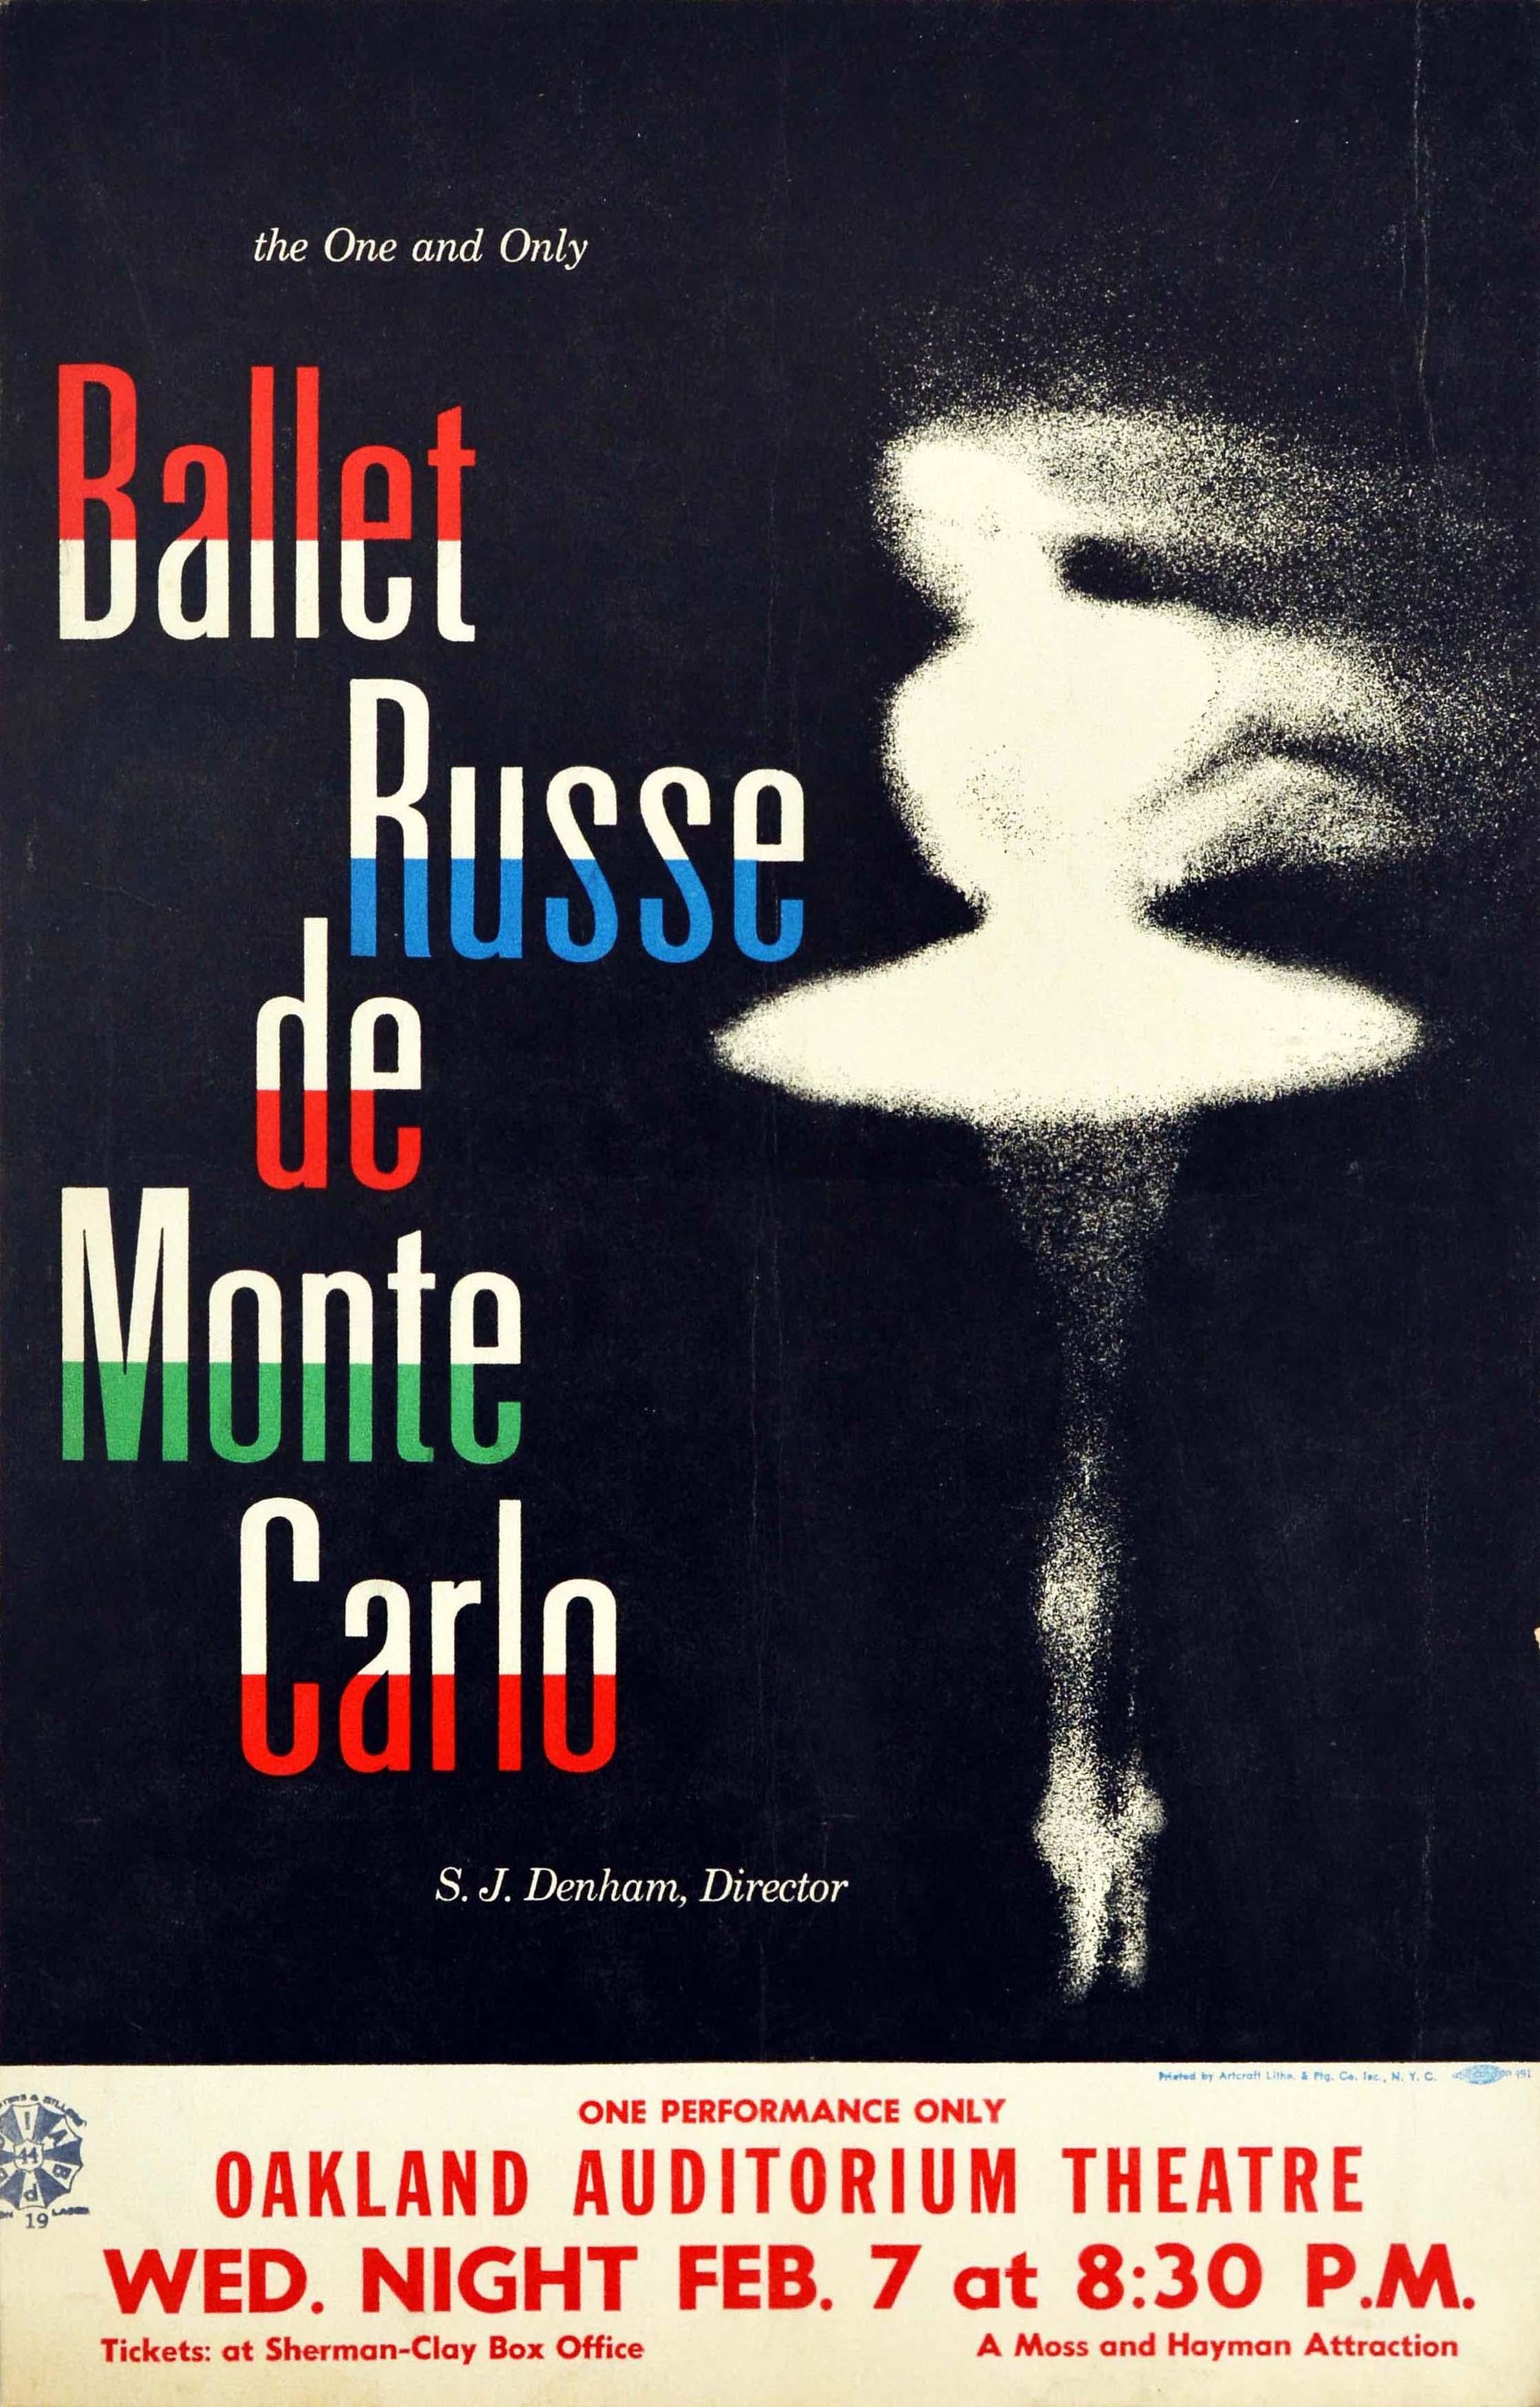 Unknown Print - Original Vintage Poster The One And Only Ballet Russe De Monte Carlo Dancer Art